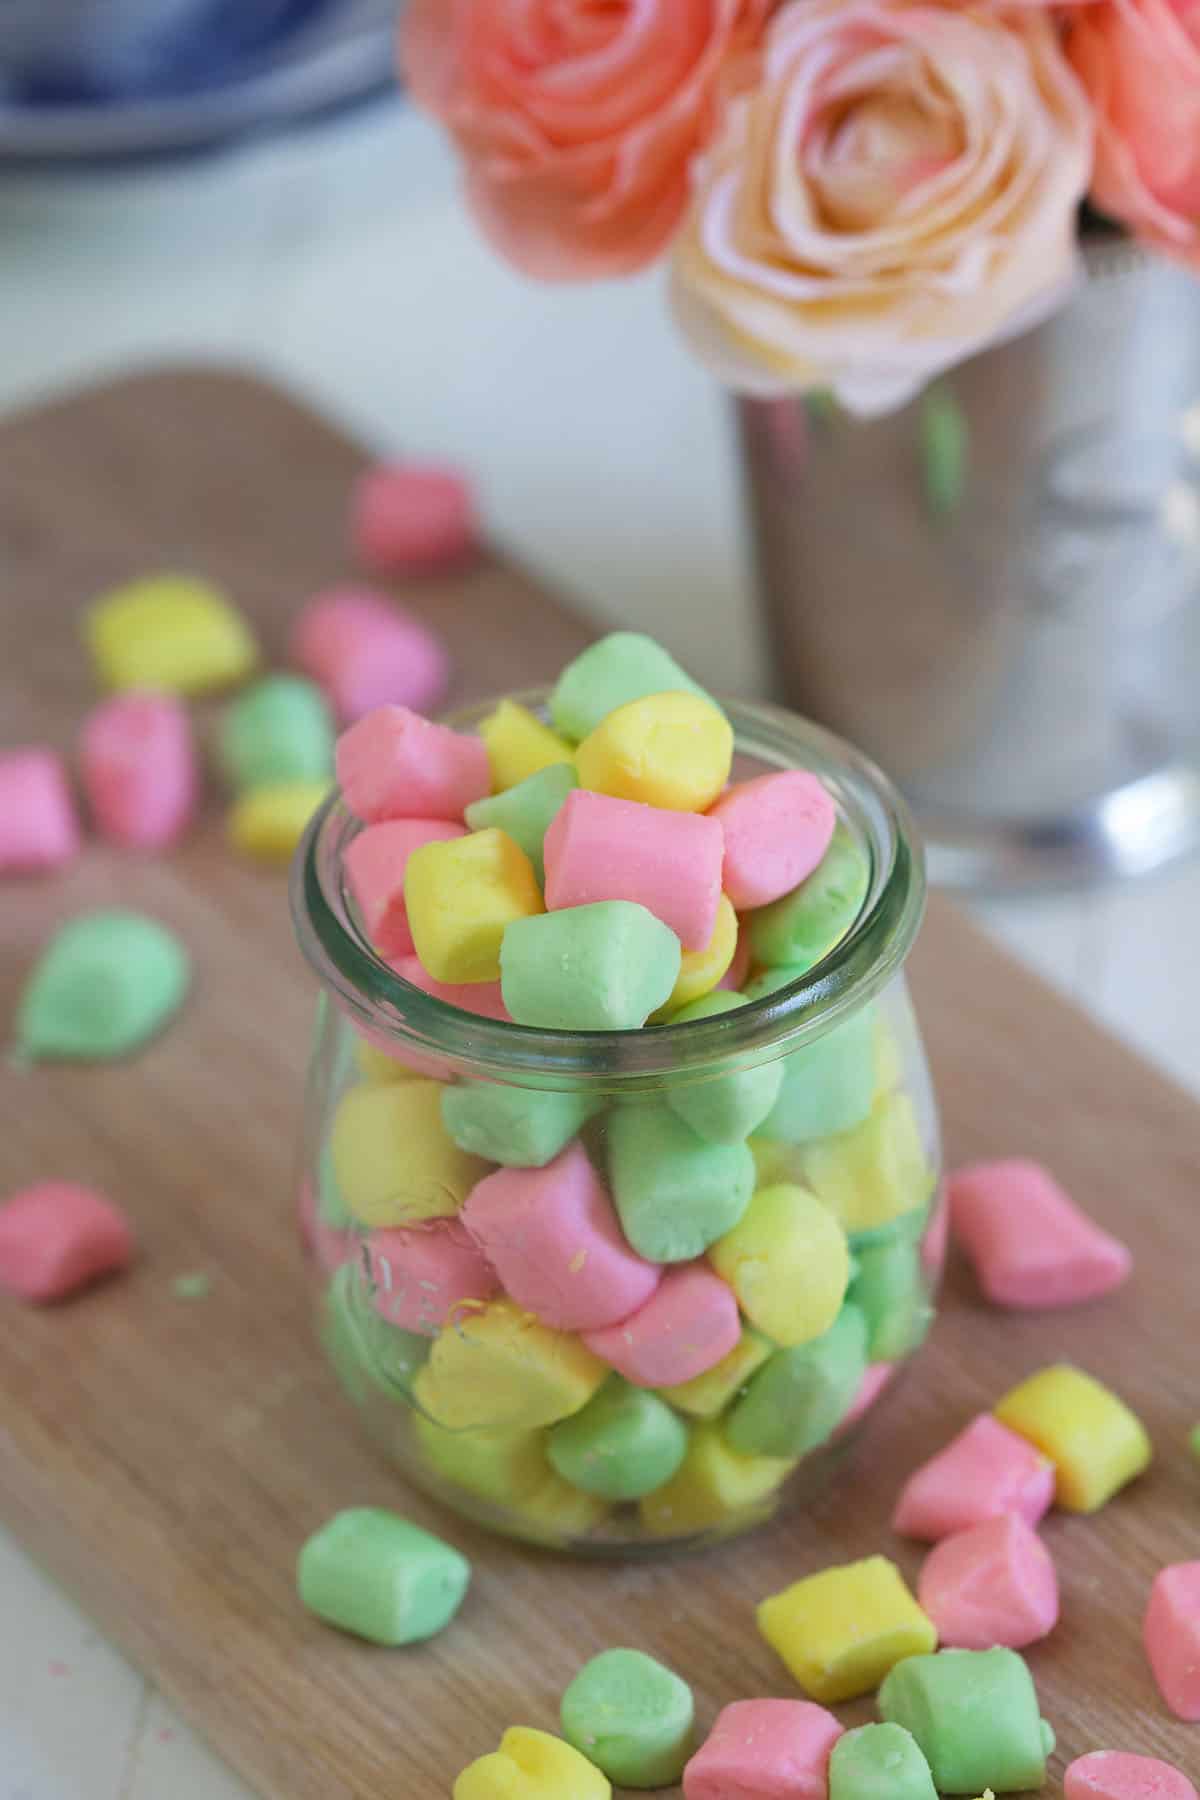 Colorful butter mints are in a small glass.